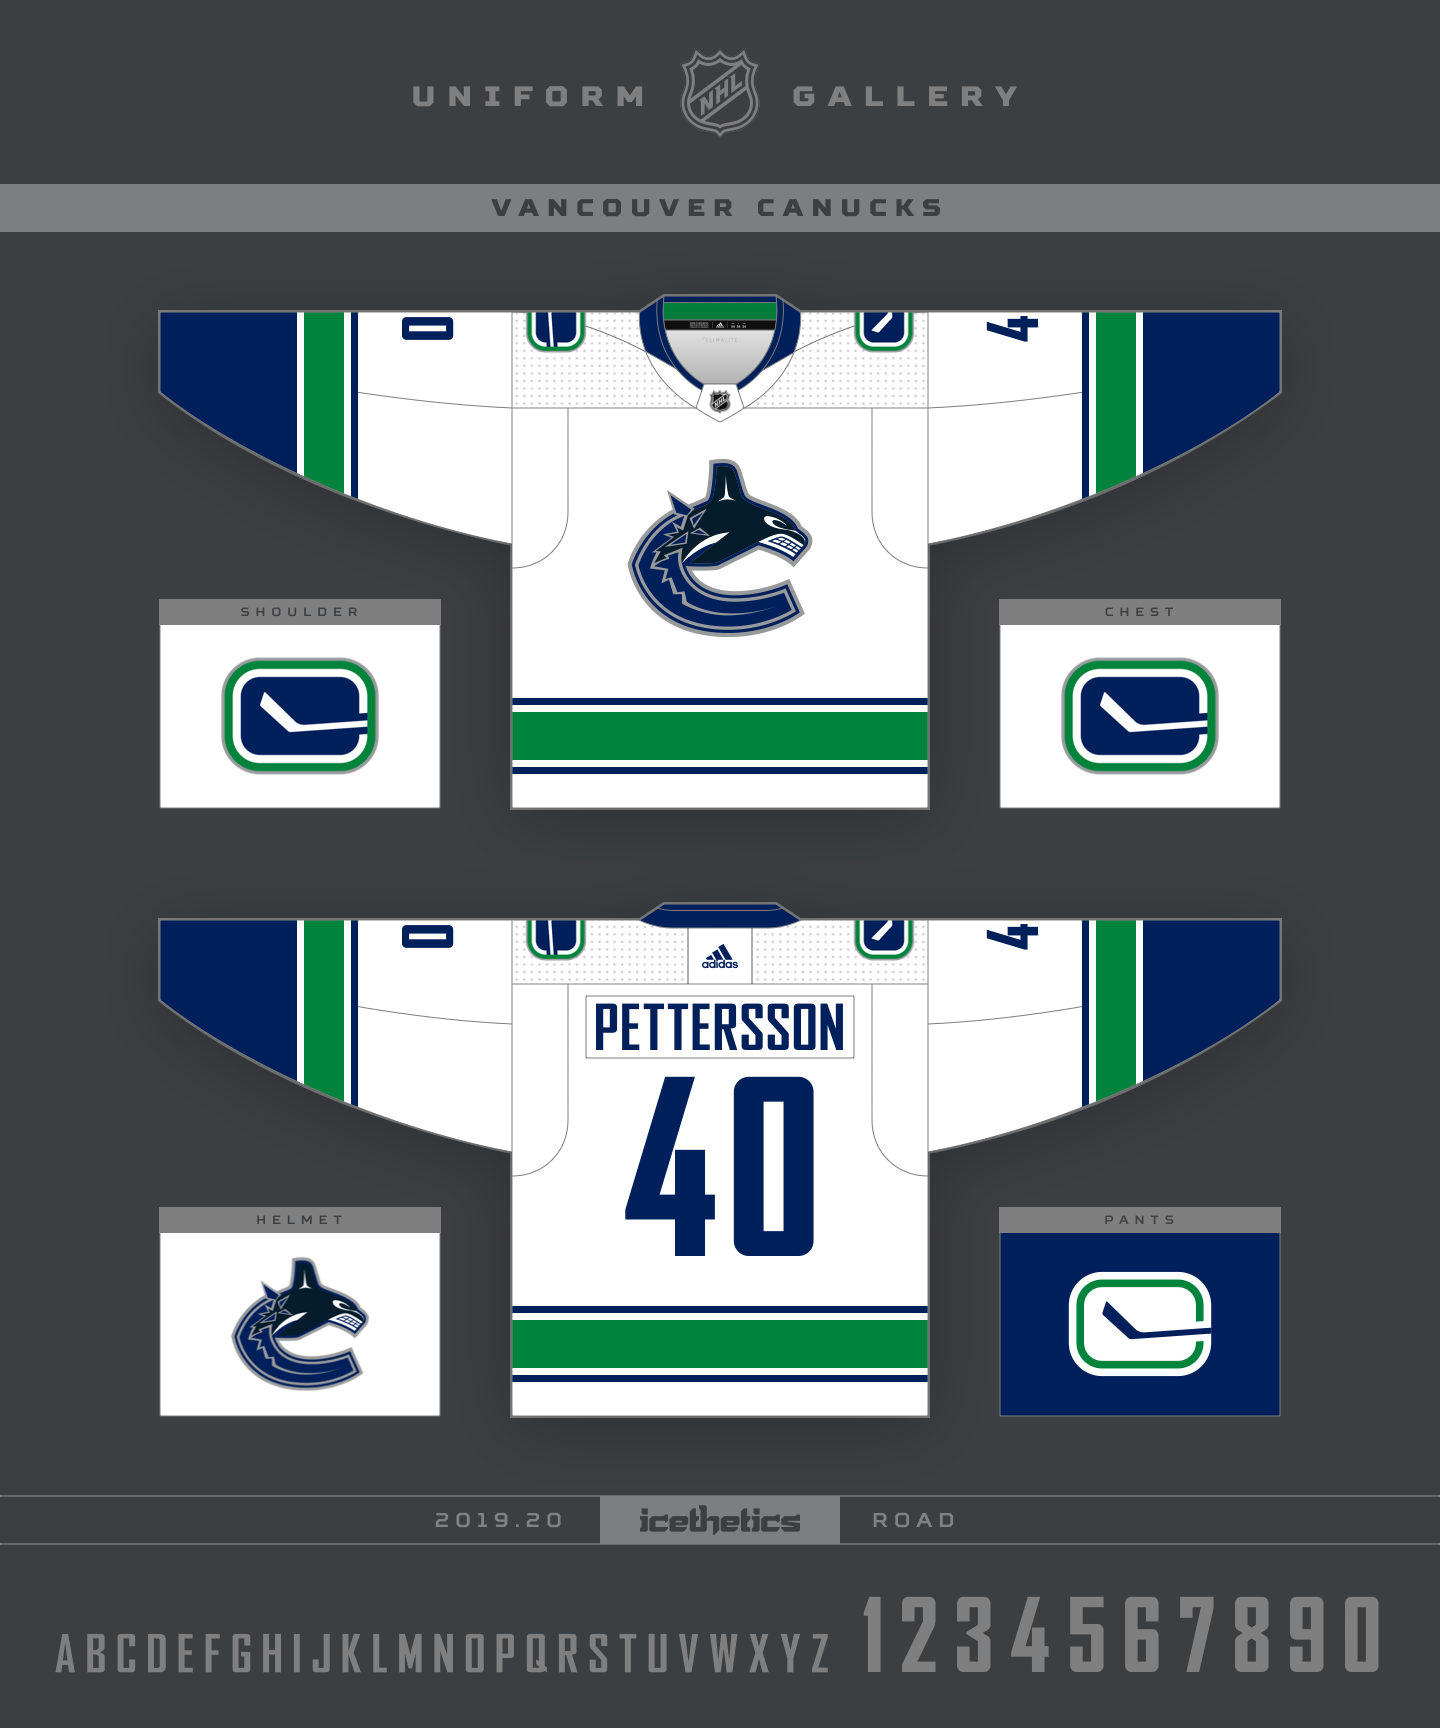  Canucks unveil quartet of new sweaters for 50th anniversary